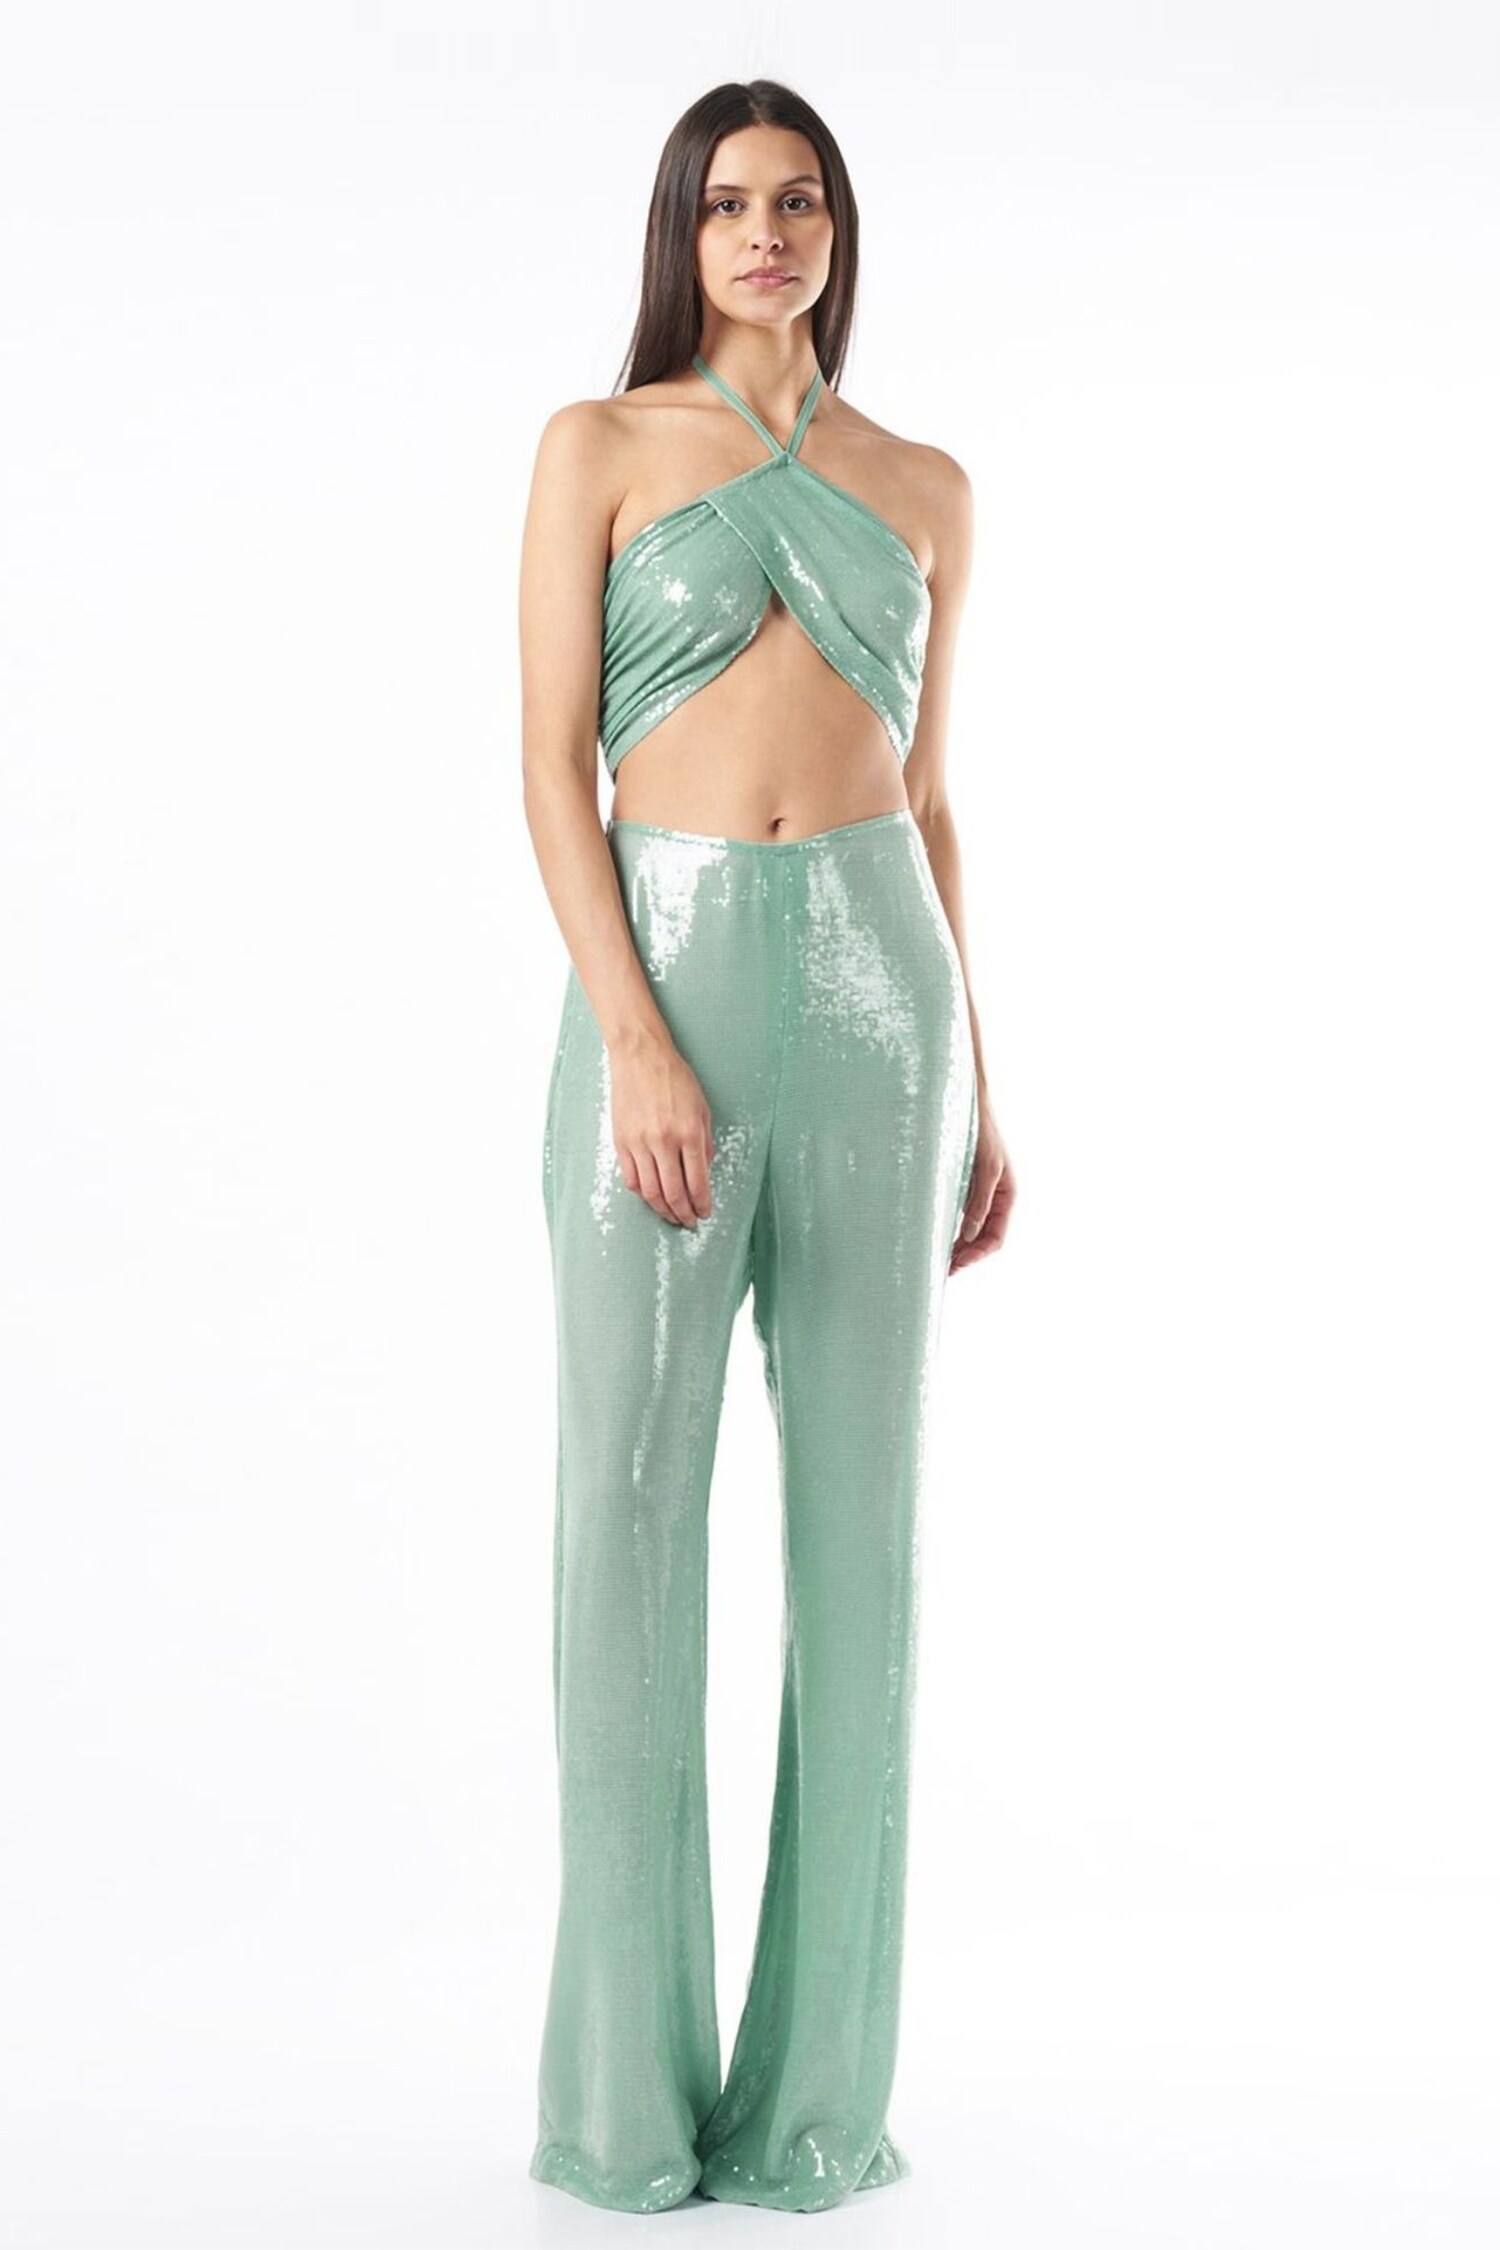 Iris Green Sequin Pants  The Ambition Collective